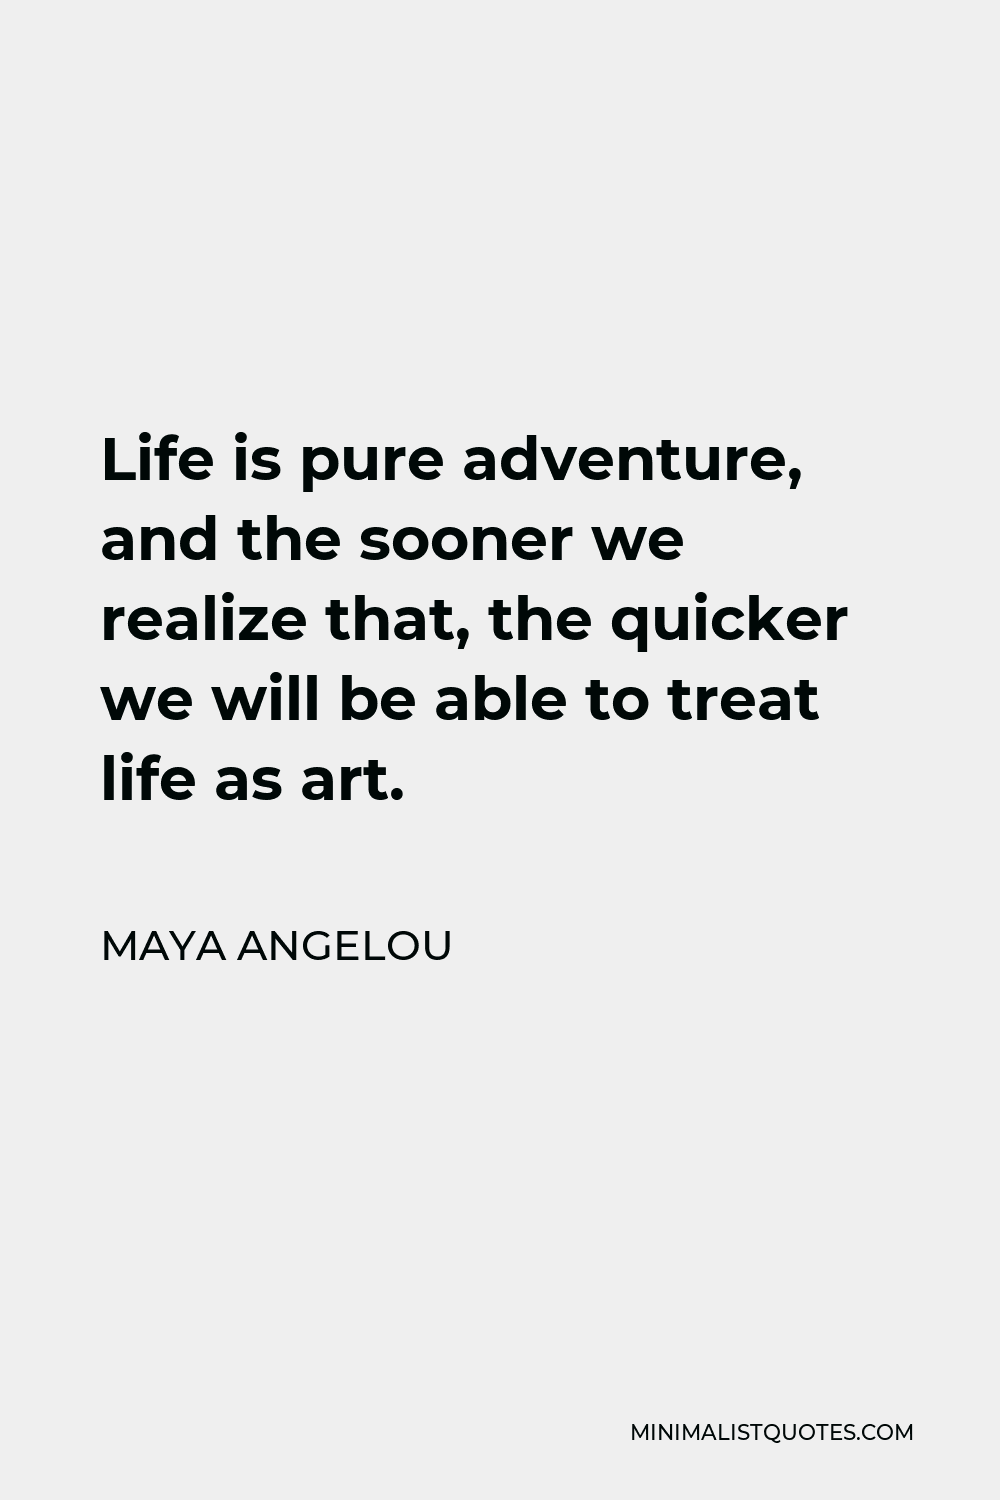 Maya Angelou Quote - Life is pure adventure, and the sooner we realize that, the quicker we will be able to treat life as art.